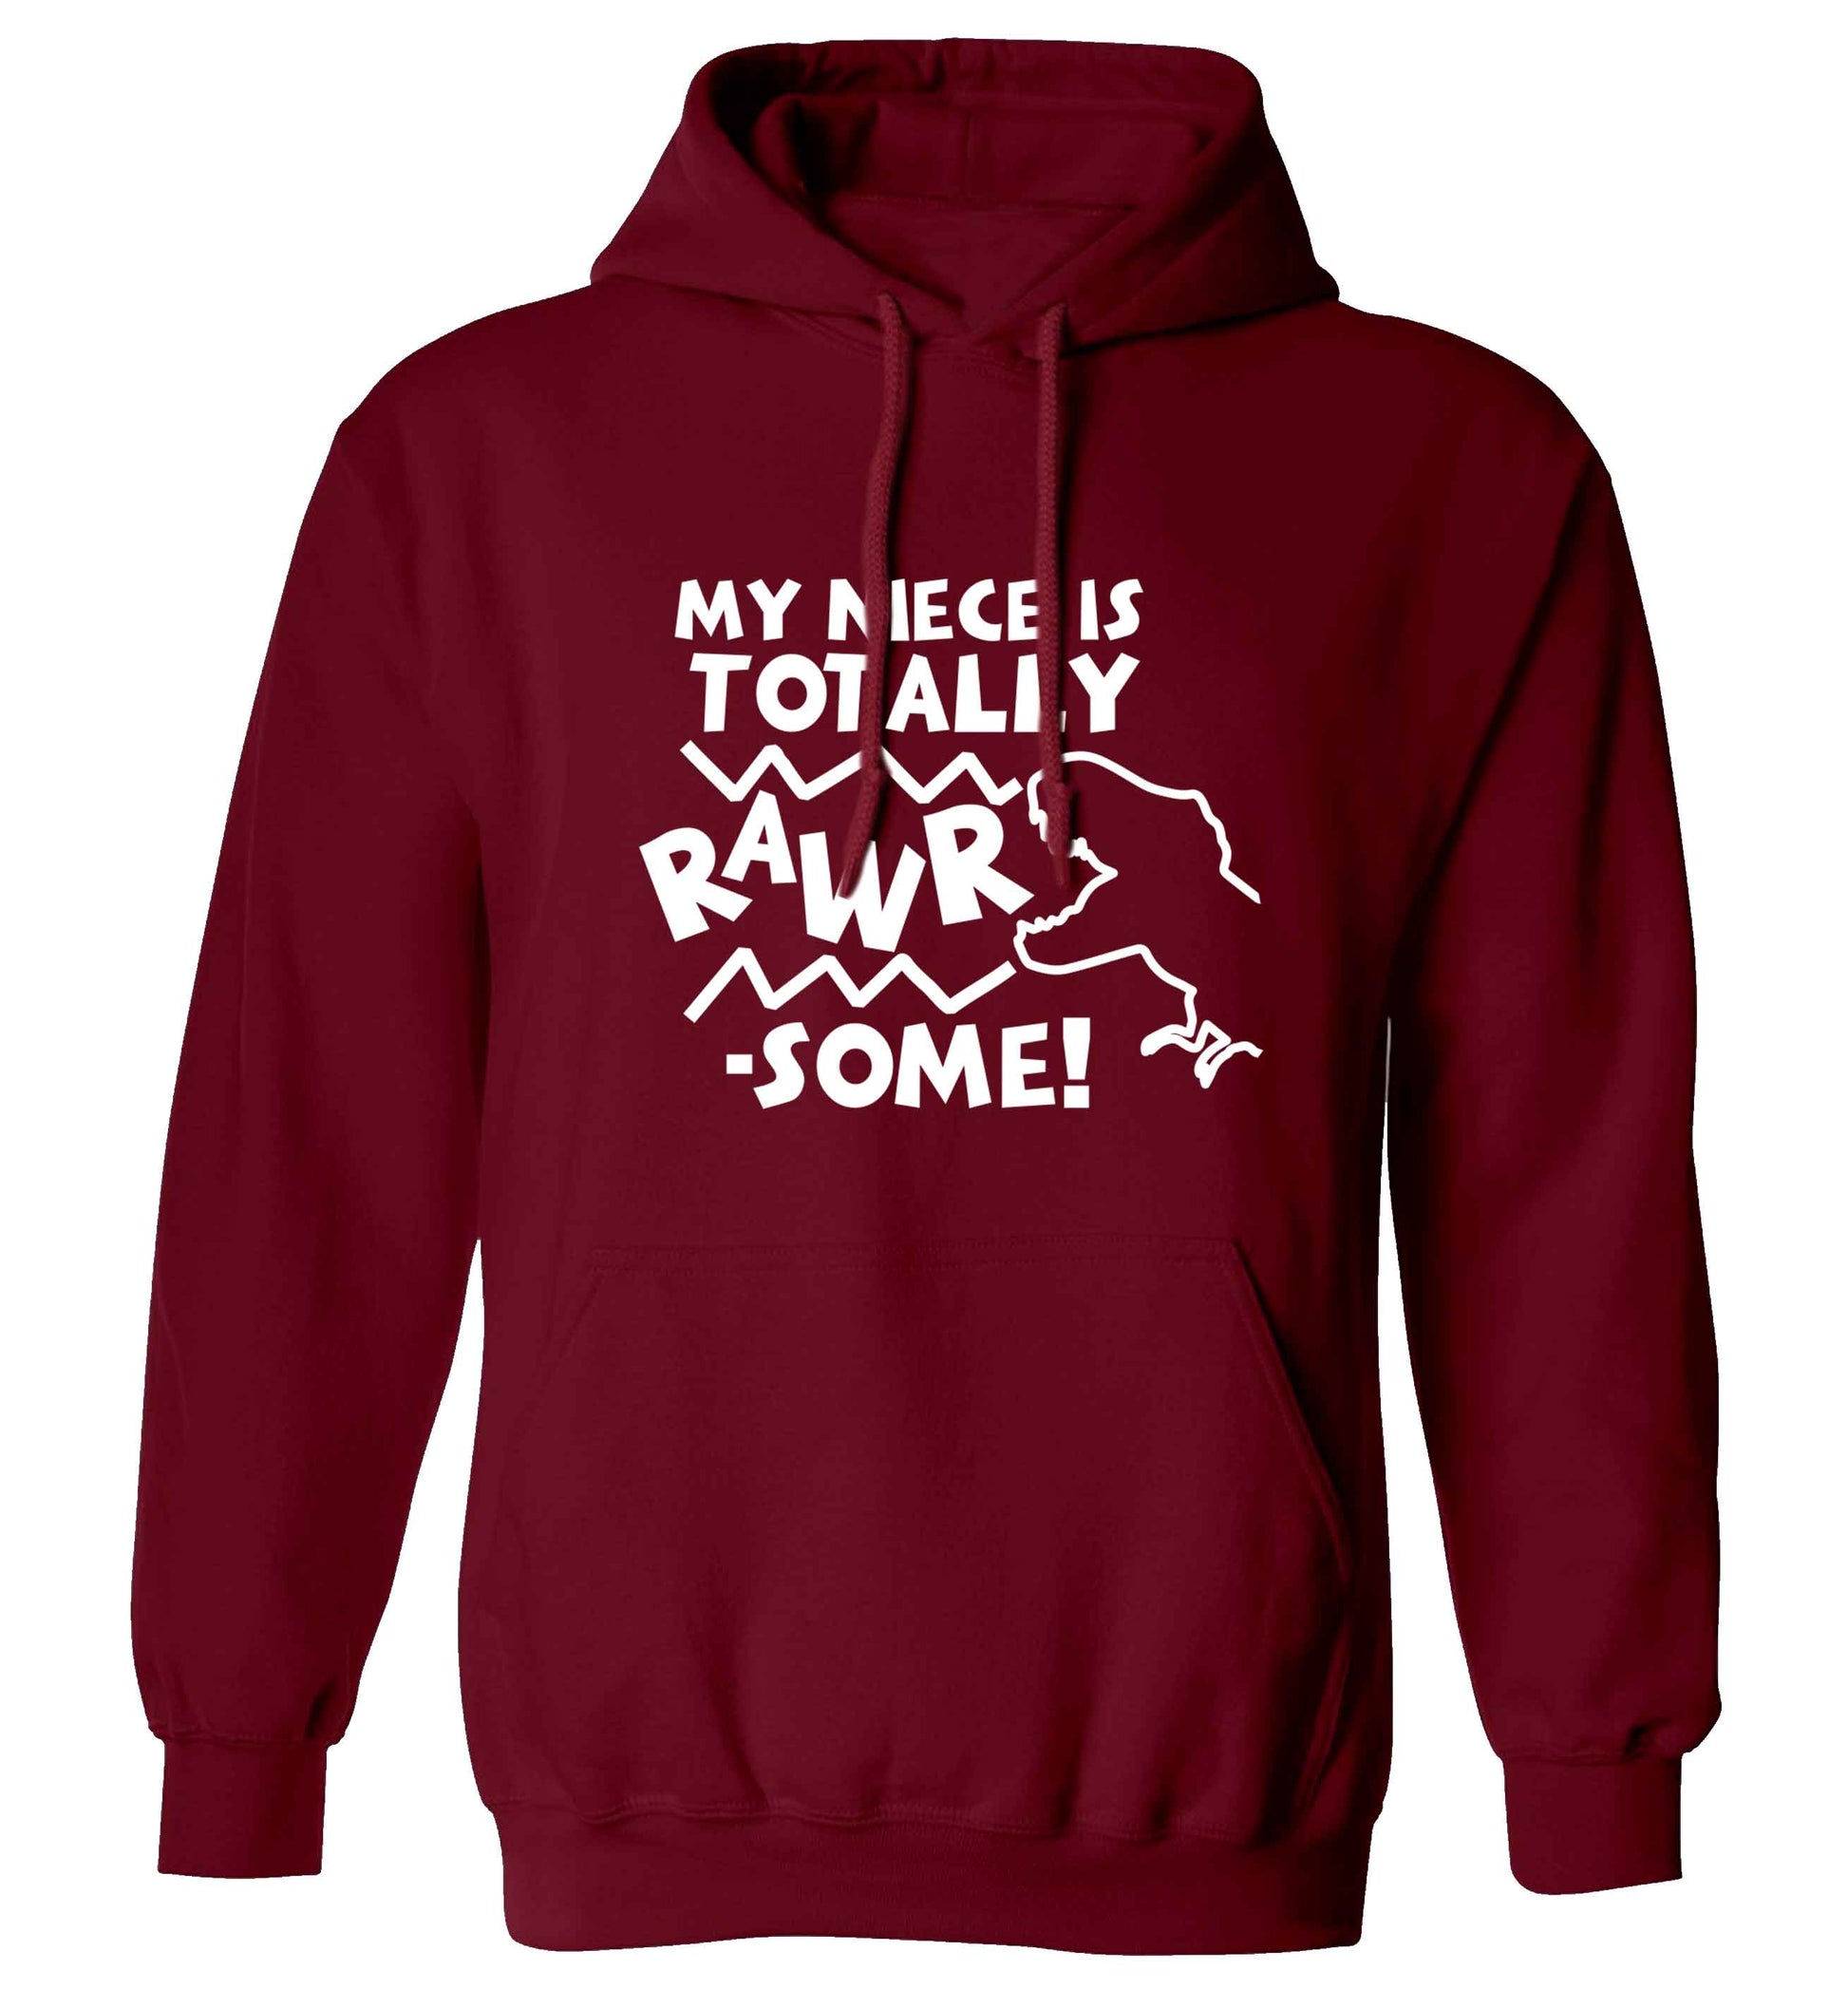 My niece is totally rawrsome adults unisex maroon hoodie 2XL